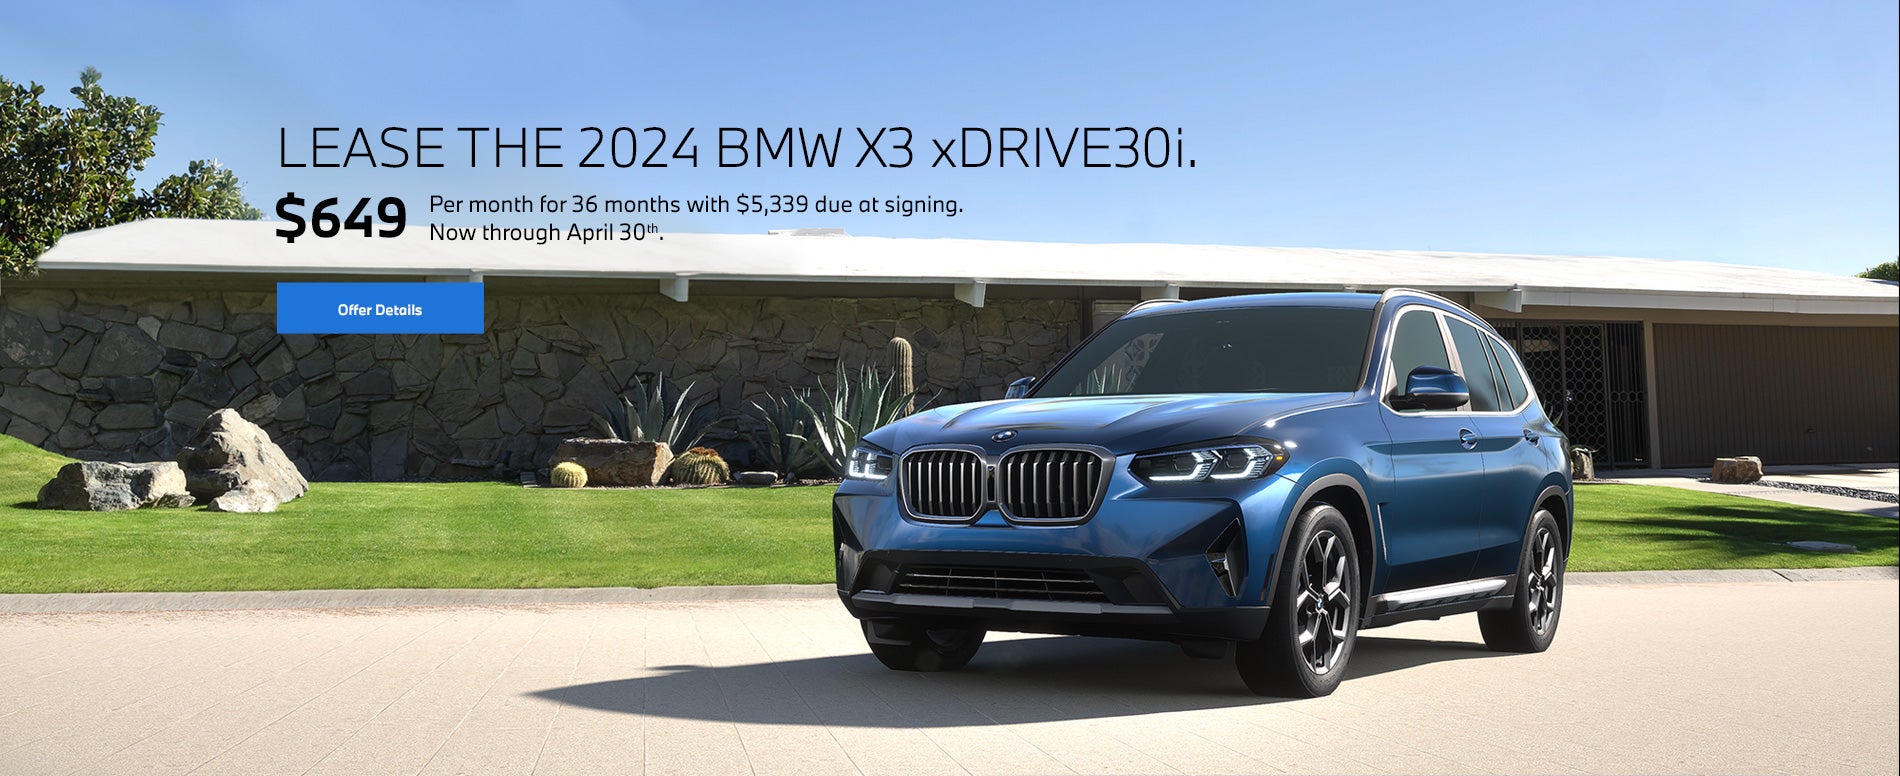 2024 X3 lease starting at $649 per month for 36 mo